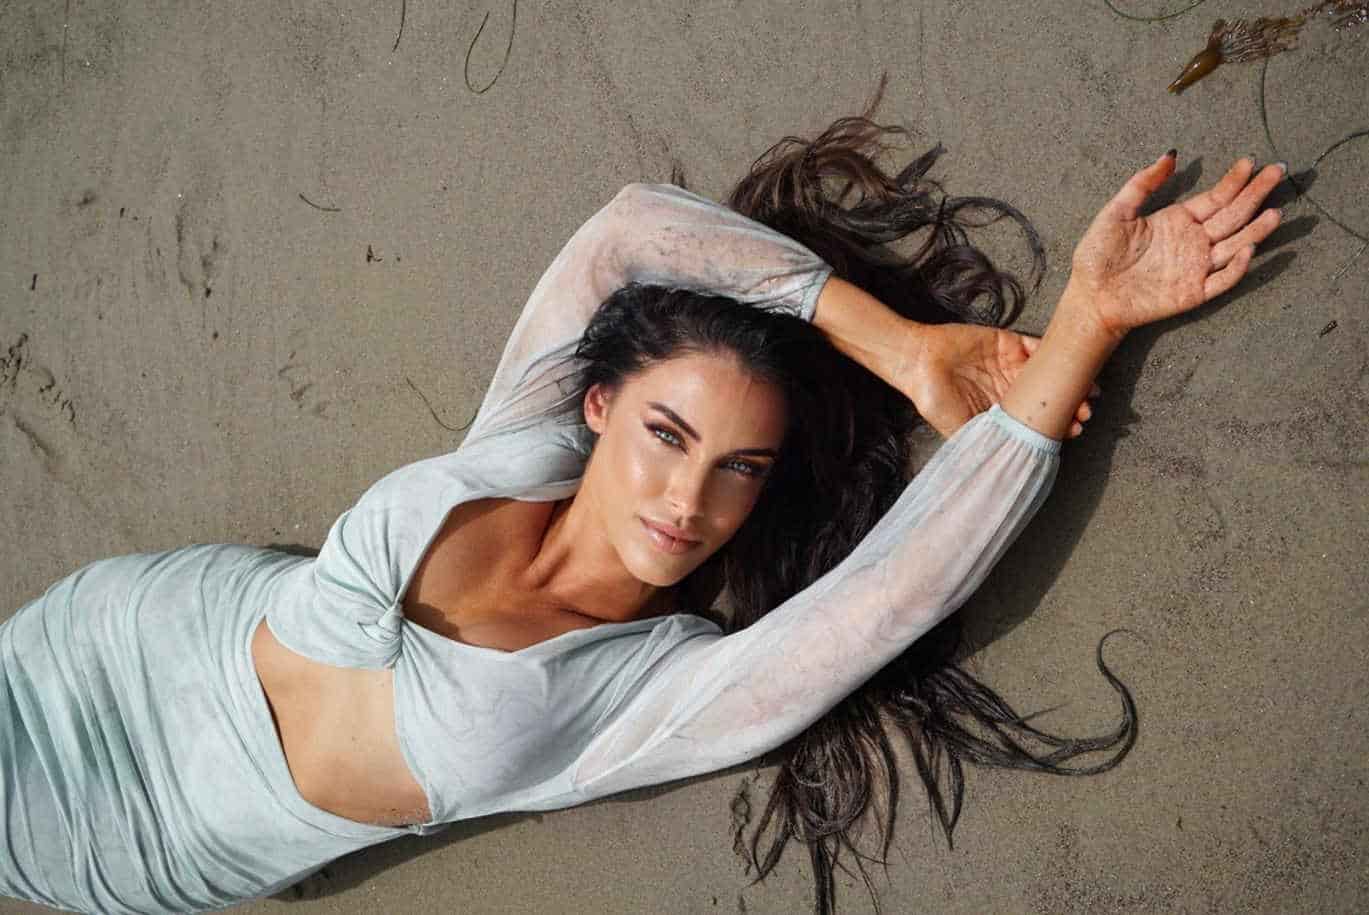 Image of Jessica Lowndes as a known model